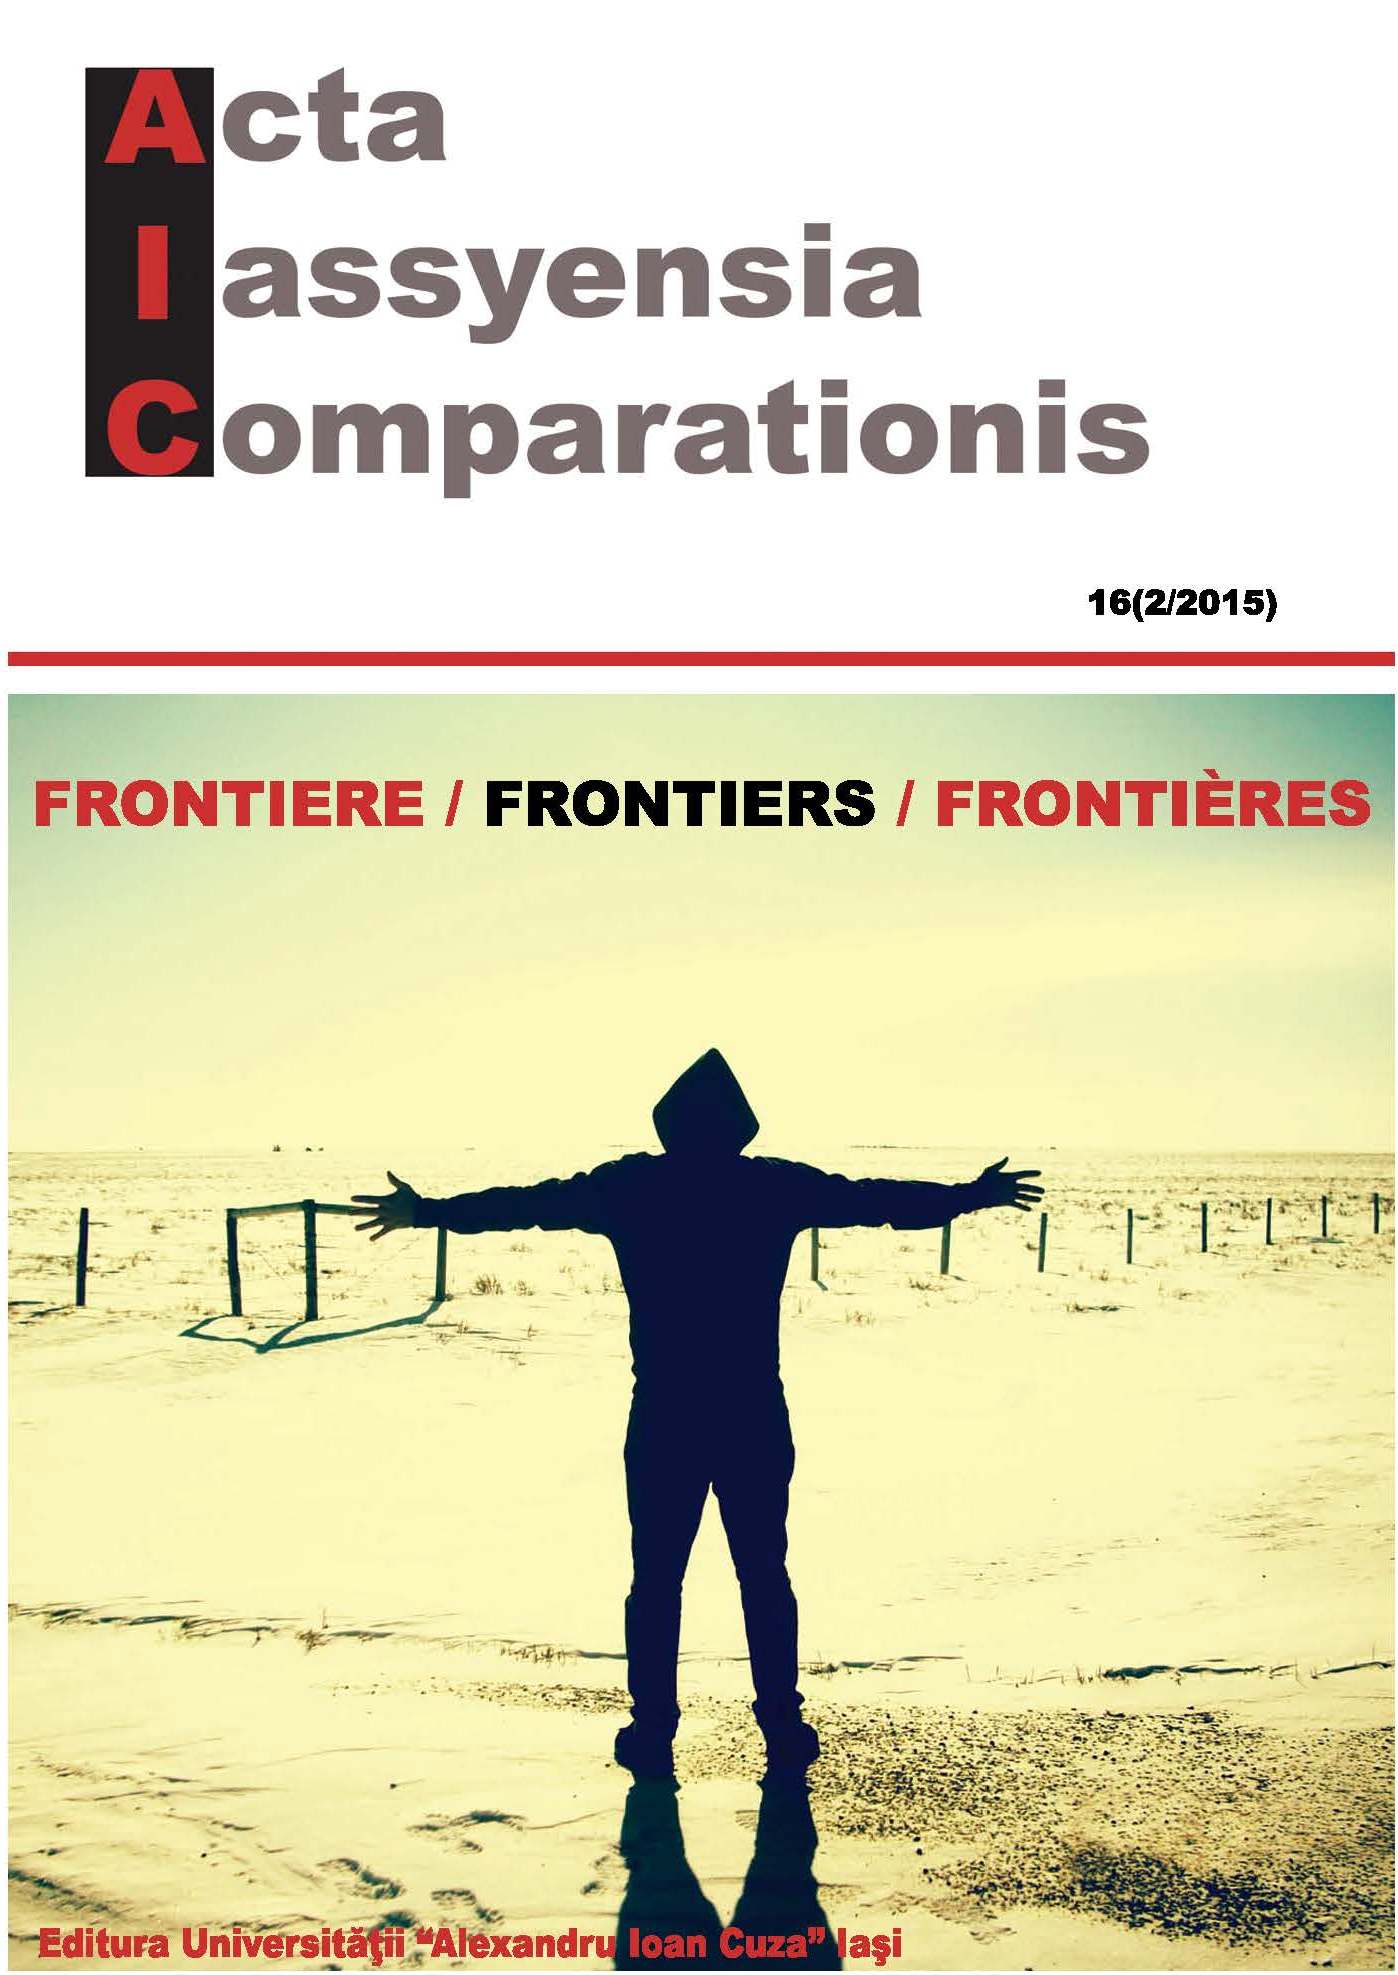 Home and Exile : The Notion of Frontier(s)/Boundary(‐ies)
in Fatou Diome’s Le Ventre de l’Atlantique Cover Image